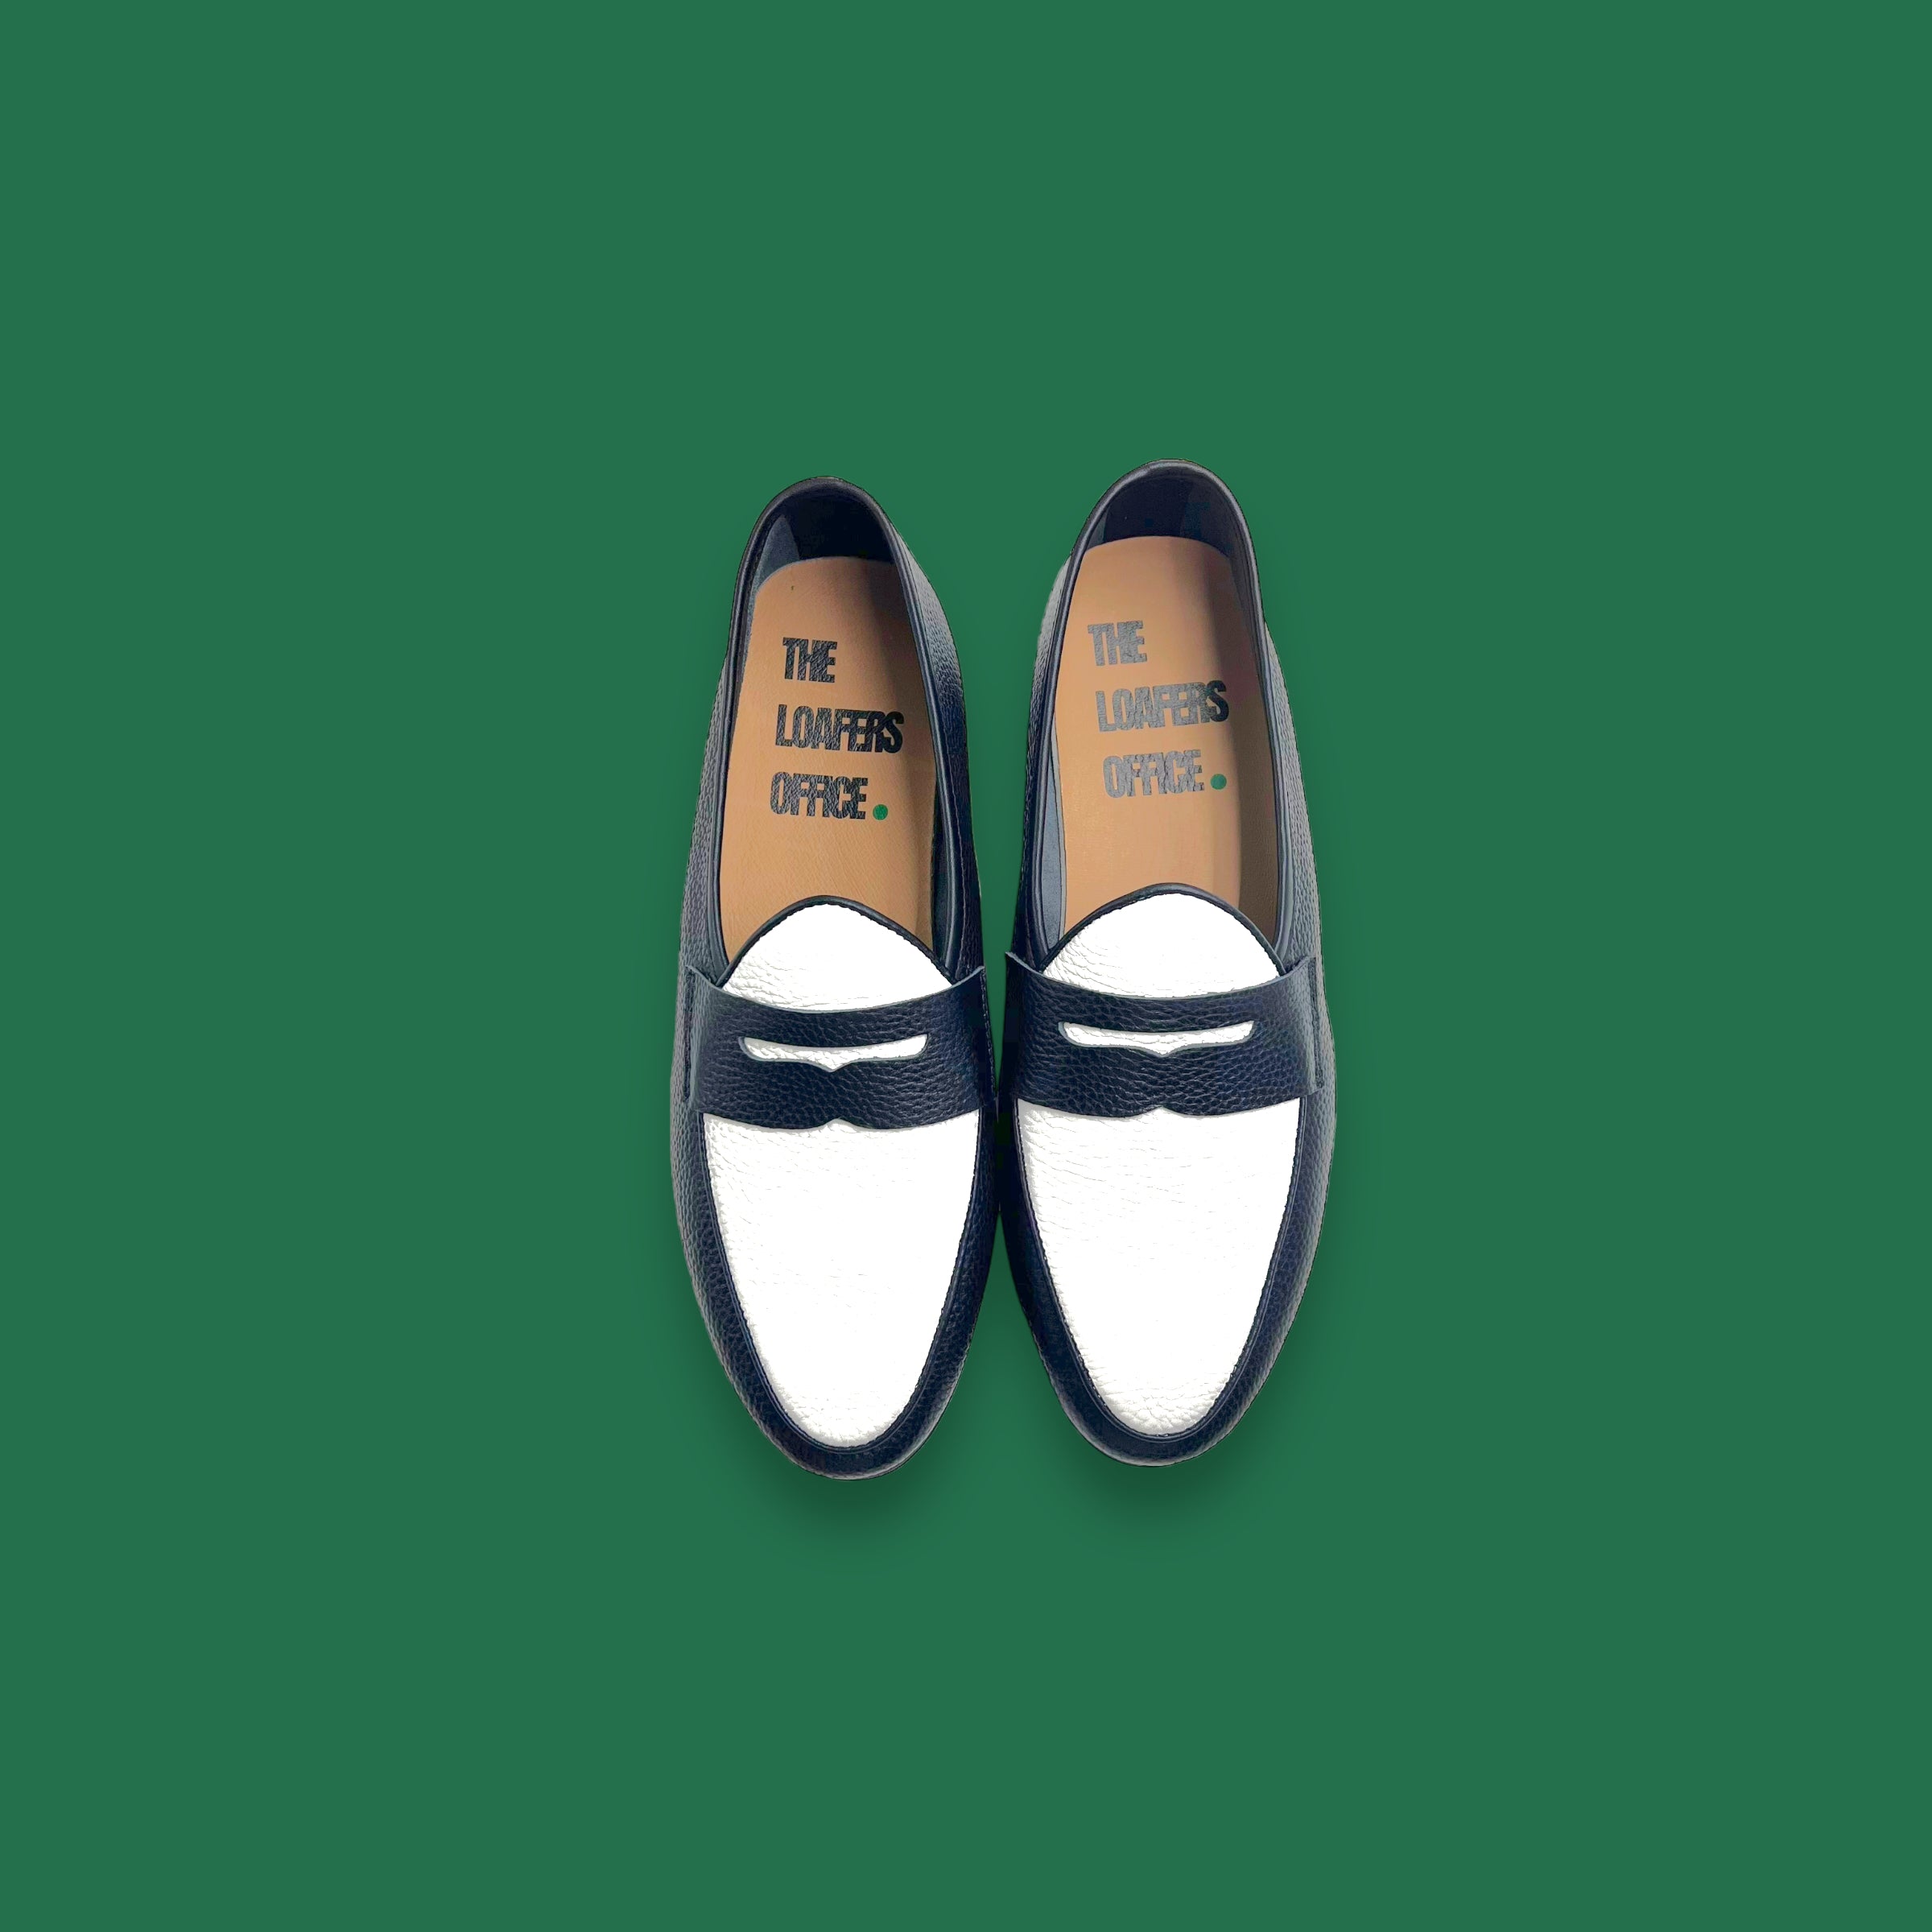 Two-toned Penny Loafer (Black & White)